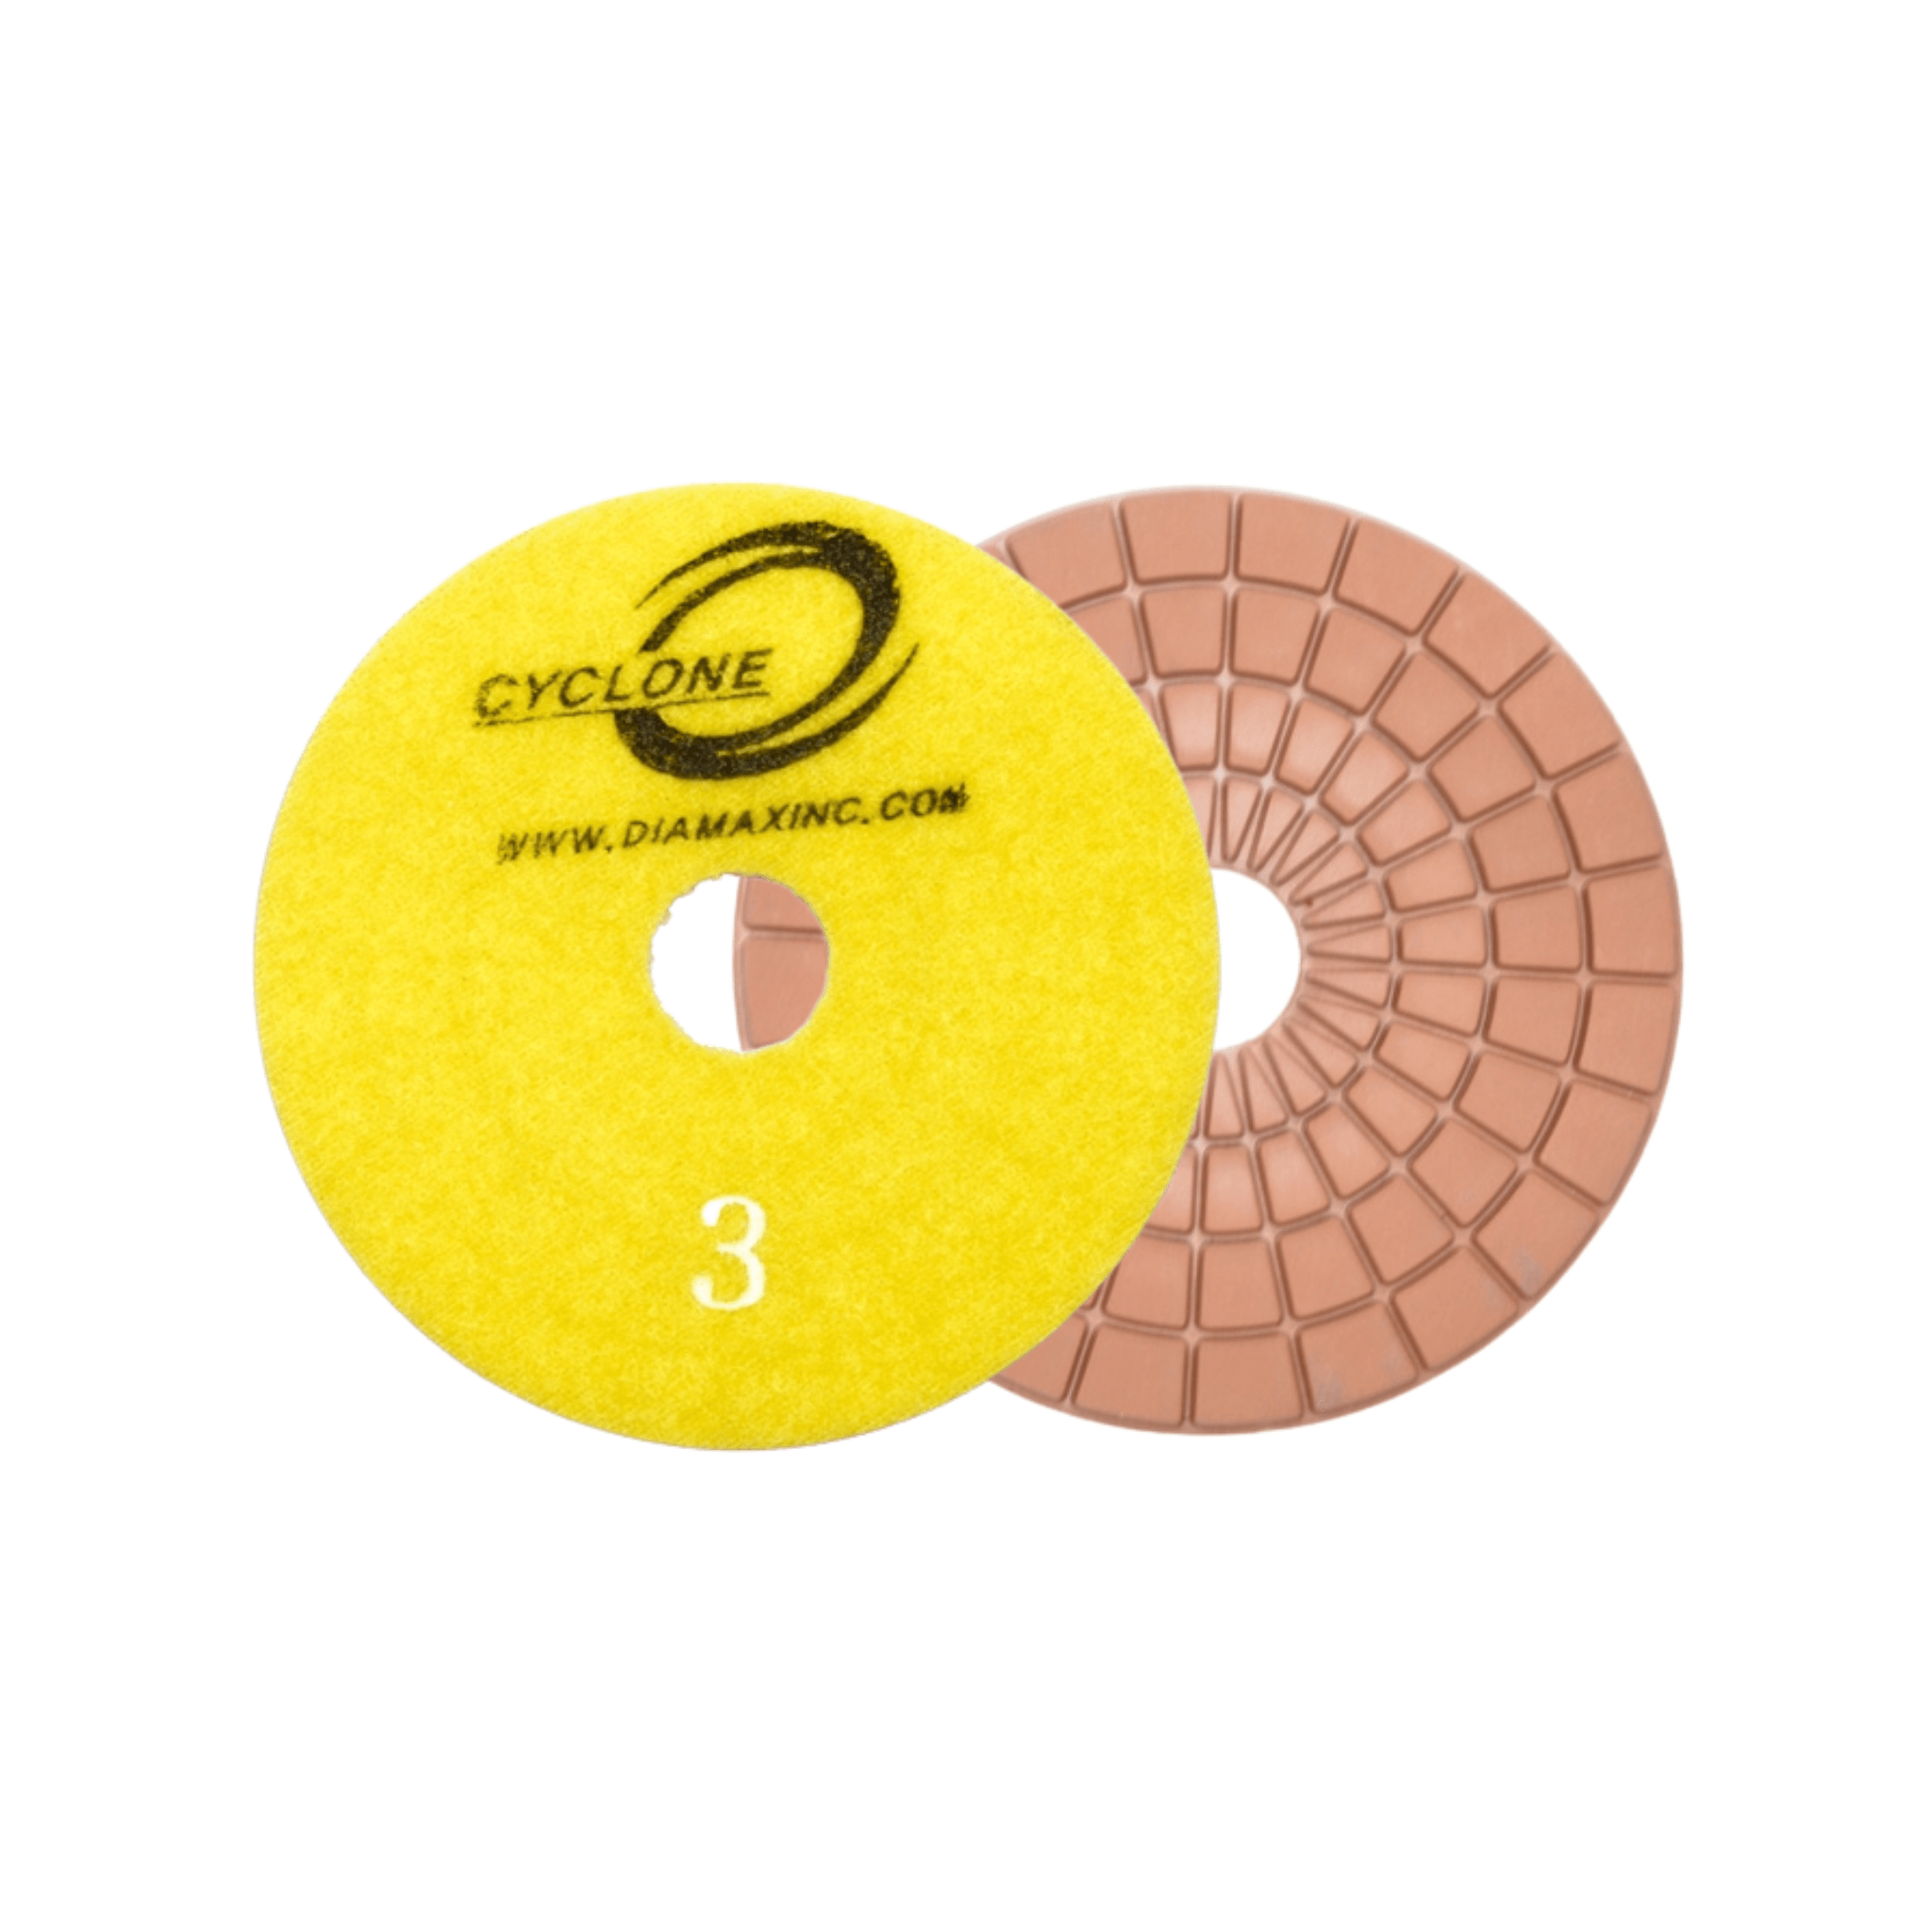 Cyclone Resin/Copper Snail Lock Pad #3 - Direct Stone Tool Supply, Inc